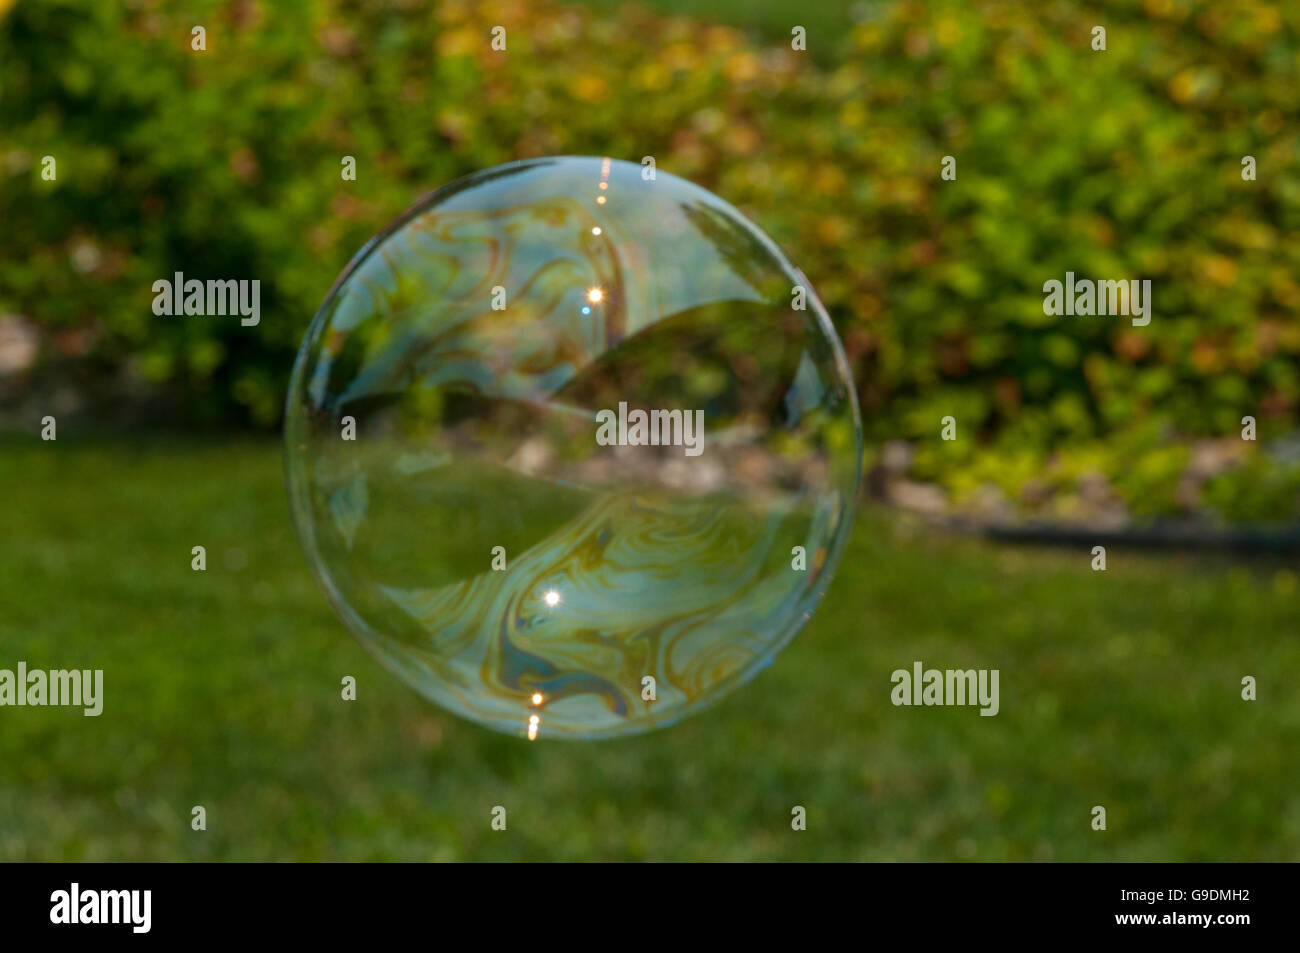 A soap bubble floats through the air in front of grass and trees. Stock Photo